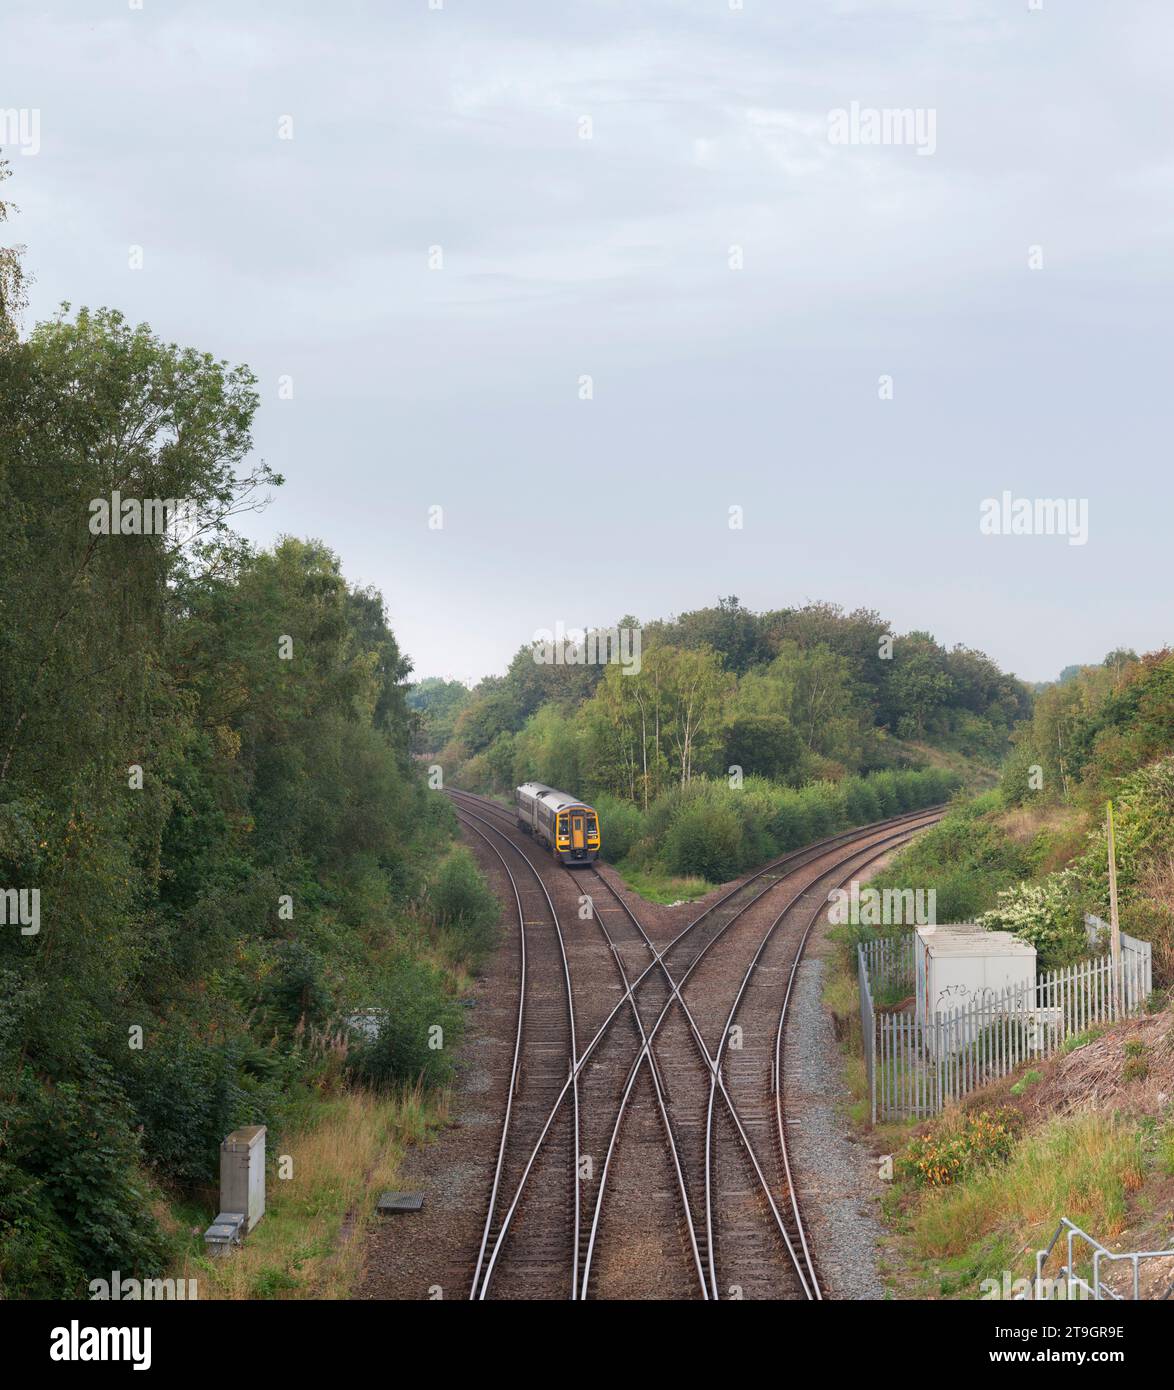 Northern Rail class 158 diesel multiple unit train passing Whitwood Junction, Castleford, Yorkshire with a diamond crossing in the foreground Stock Photo